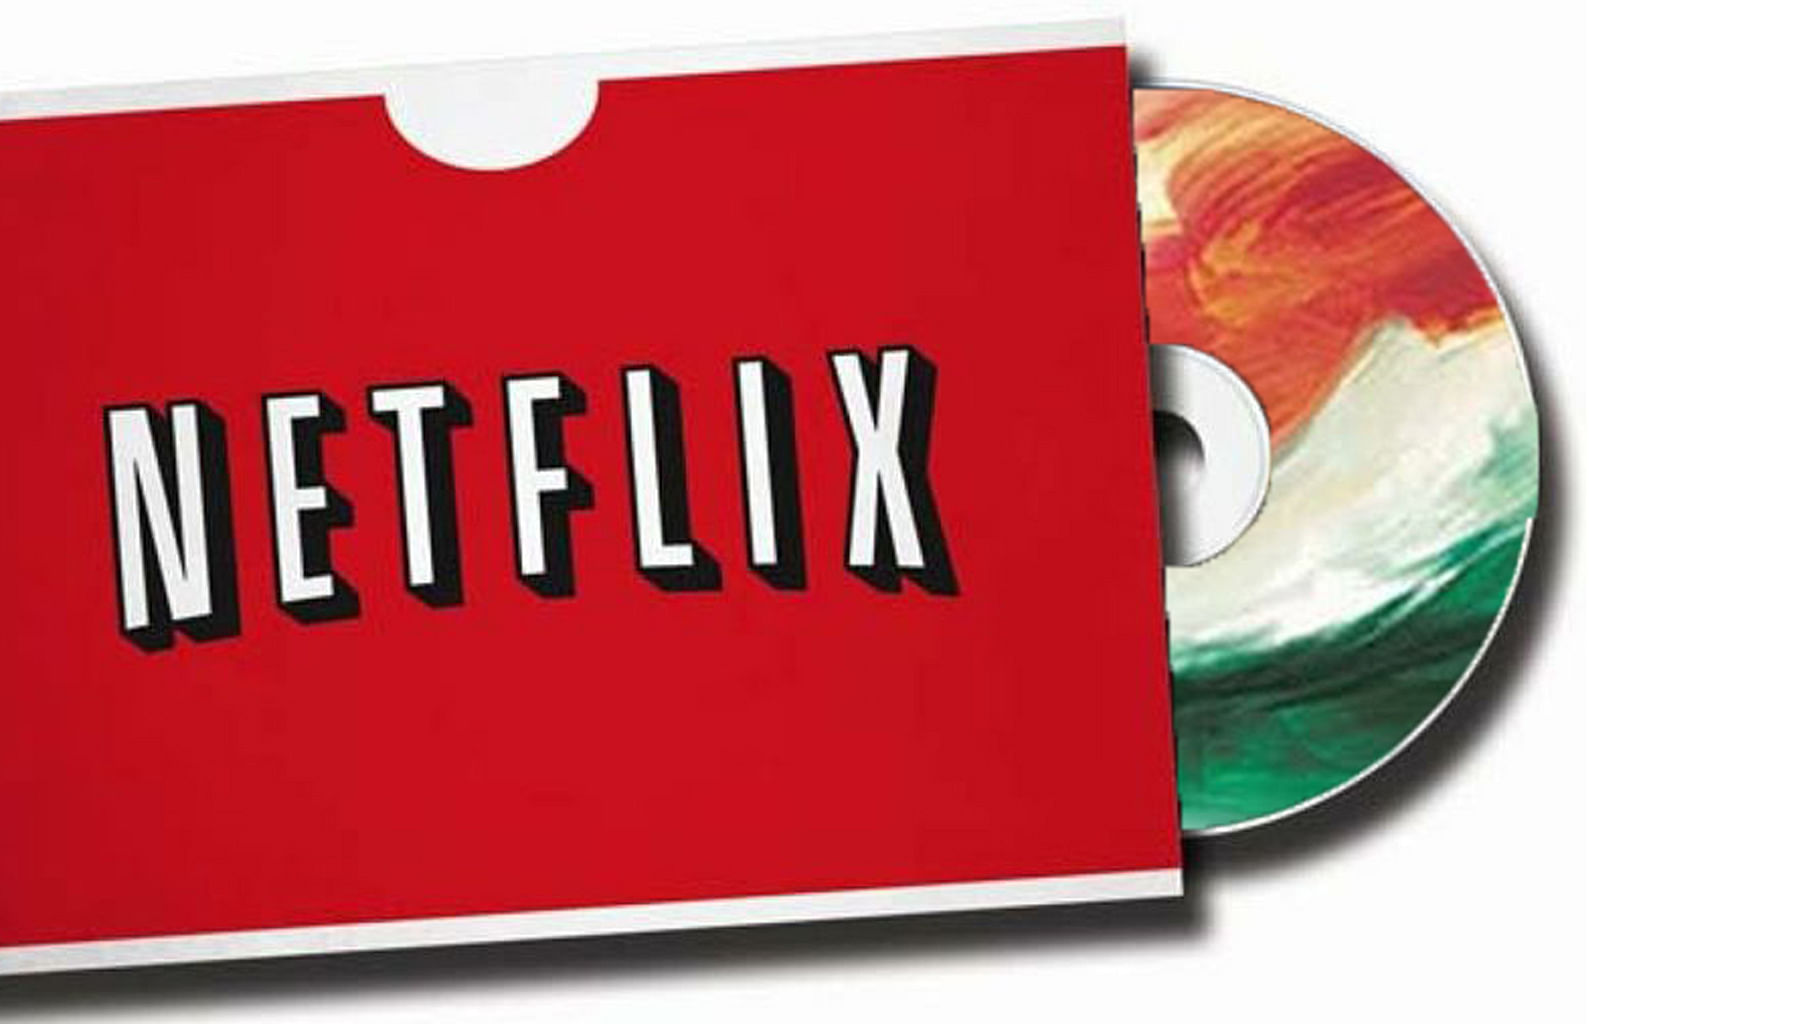 Netflix looks to expand its availability beyond mobile and desktop. (Photo: <b>The Quint</b>)